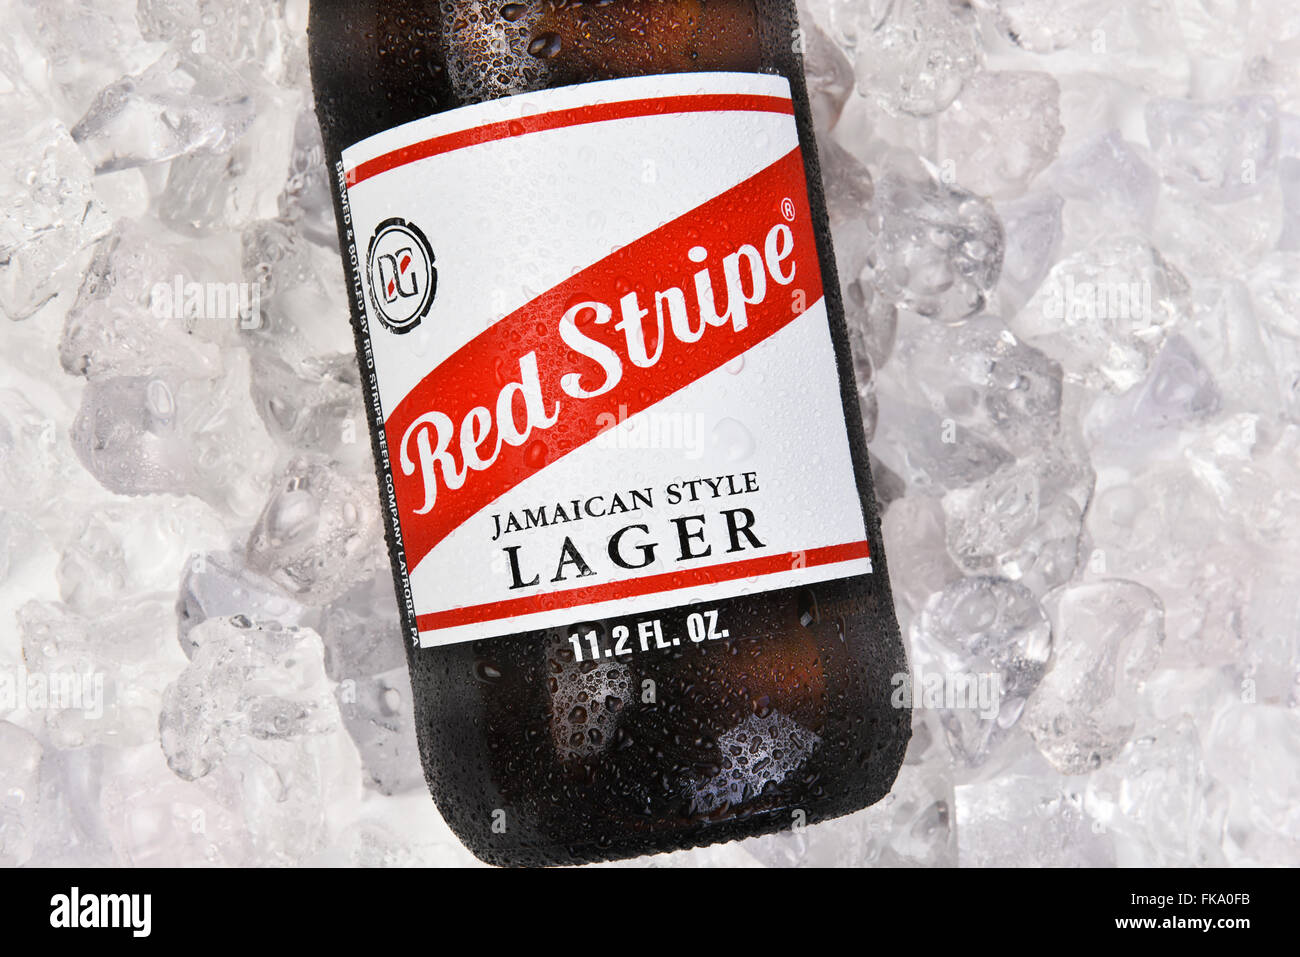 A bottle of Red Stripe Jamaican Lager on a bed of ice. Horizontal format. Stock Photo